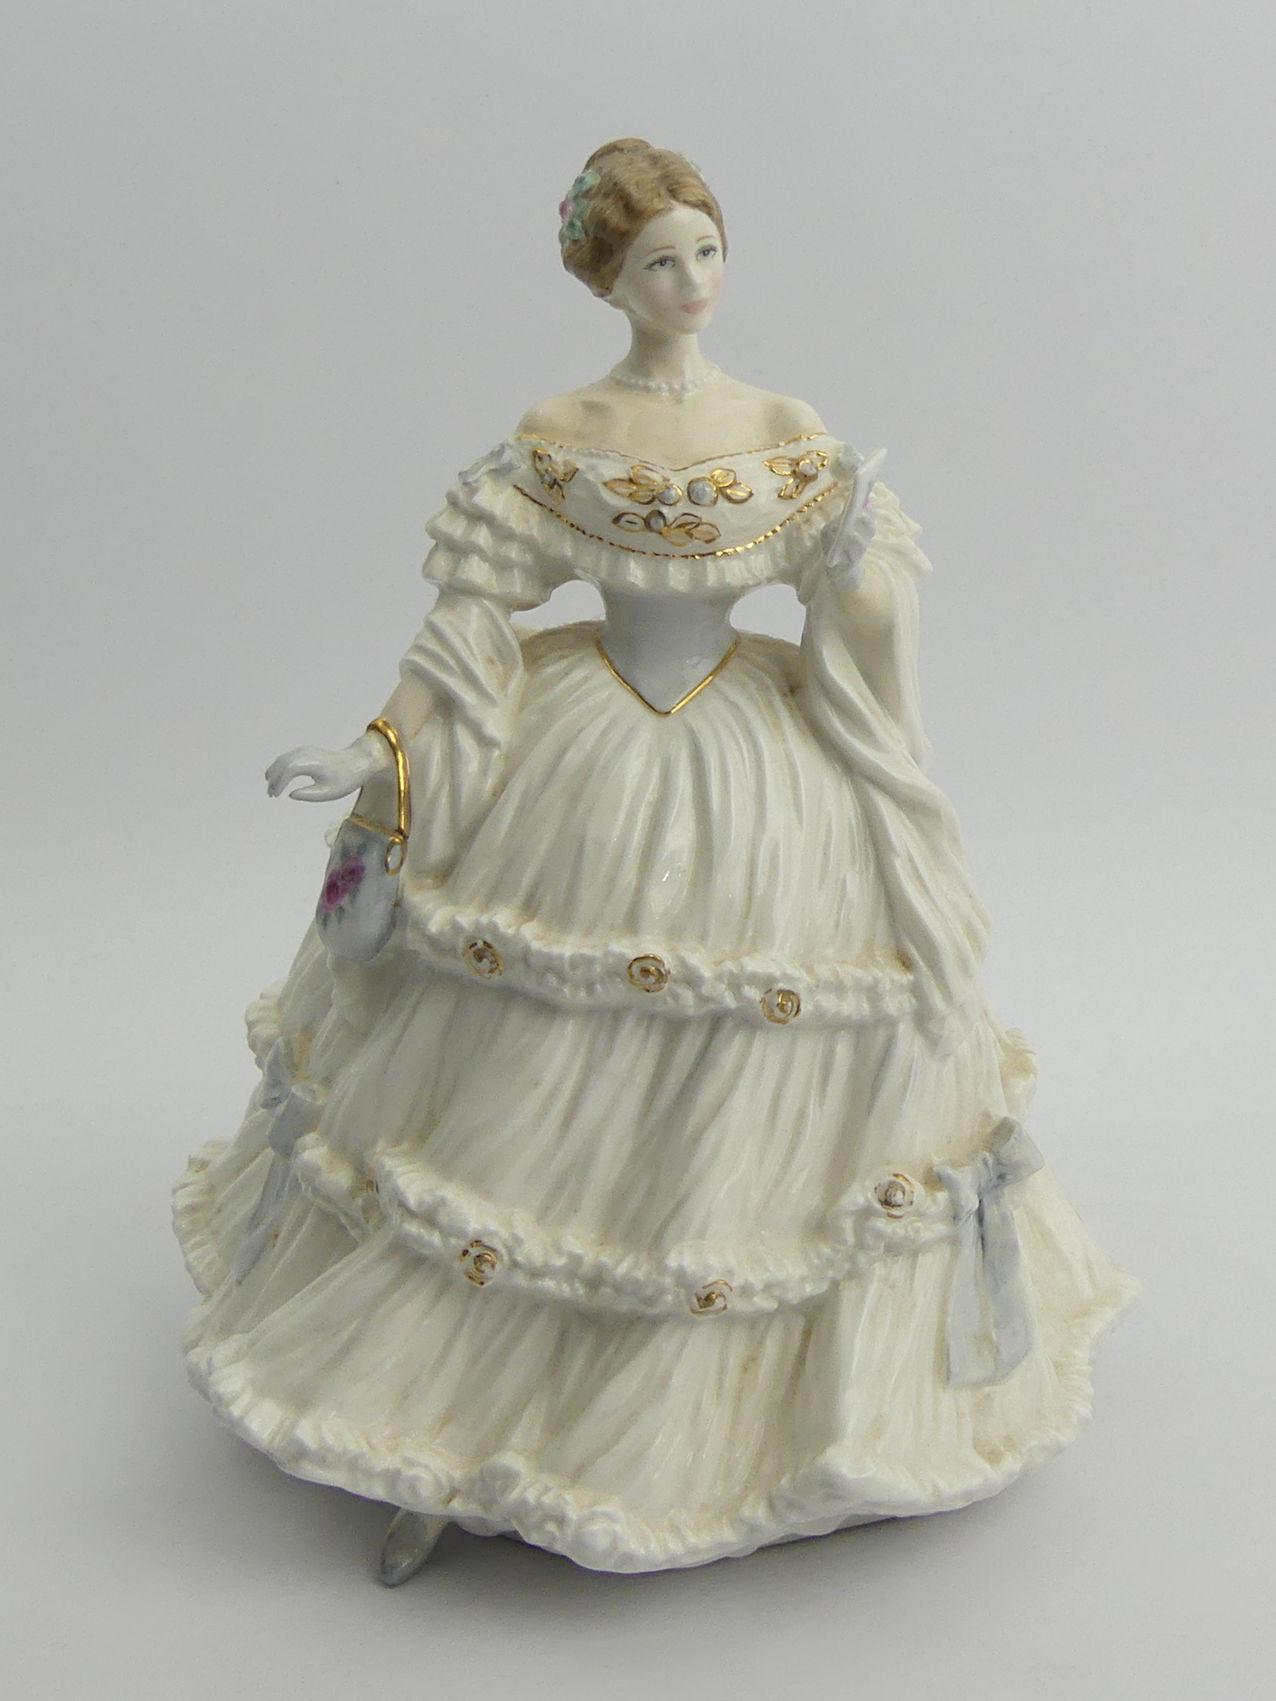 Royal Doulton Shall I Compare Thee Hn3999 limited edition china figurine. 23 cm. UK Postage £14.